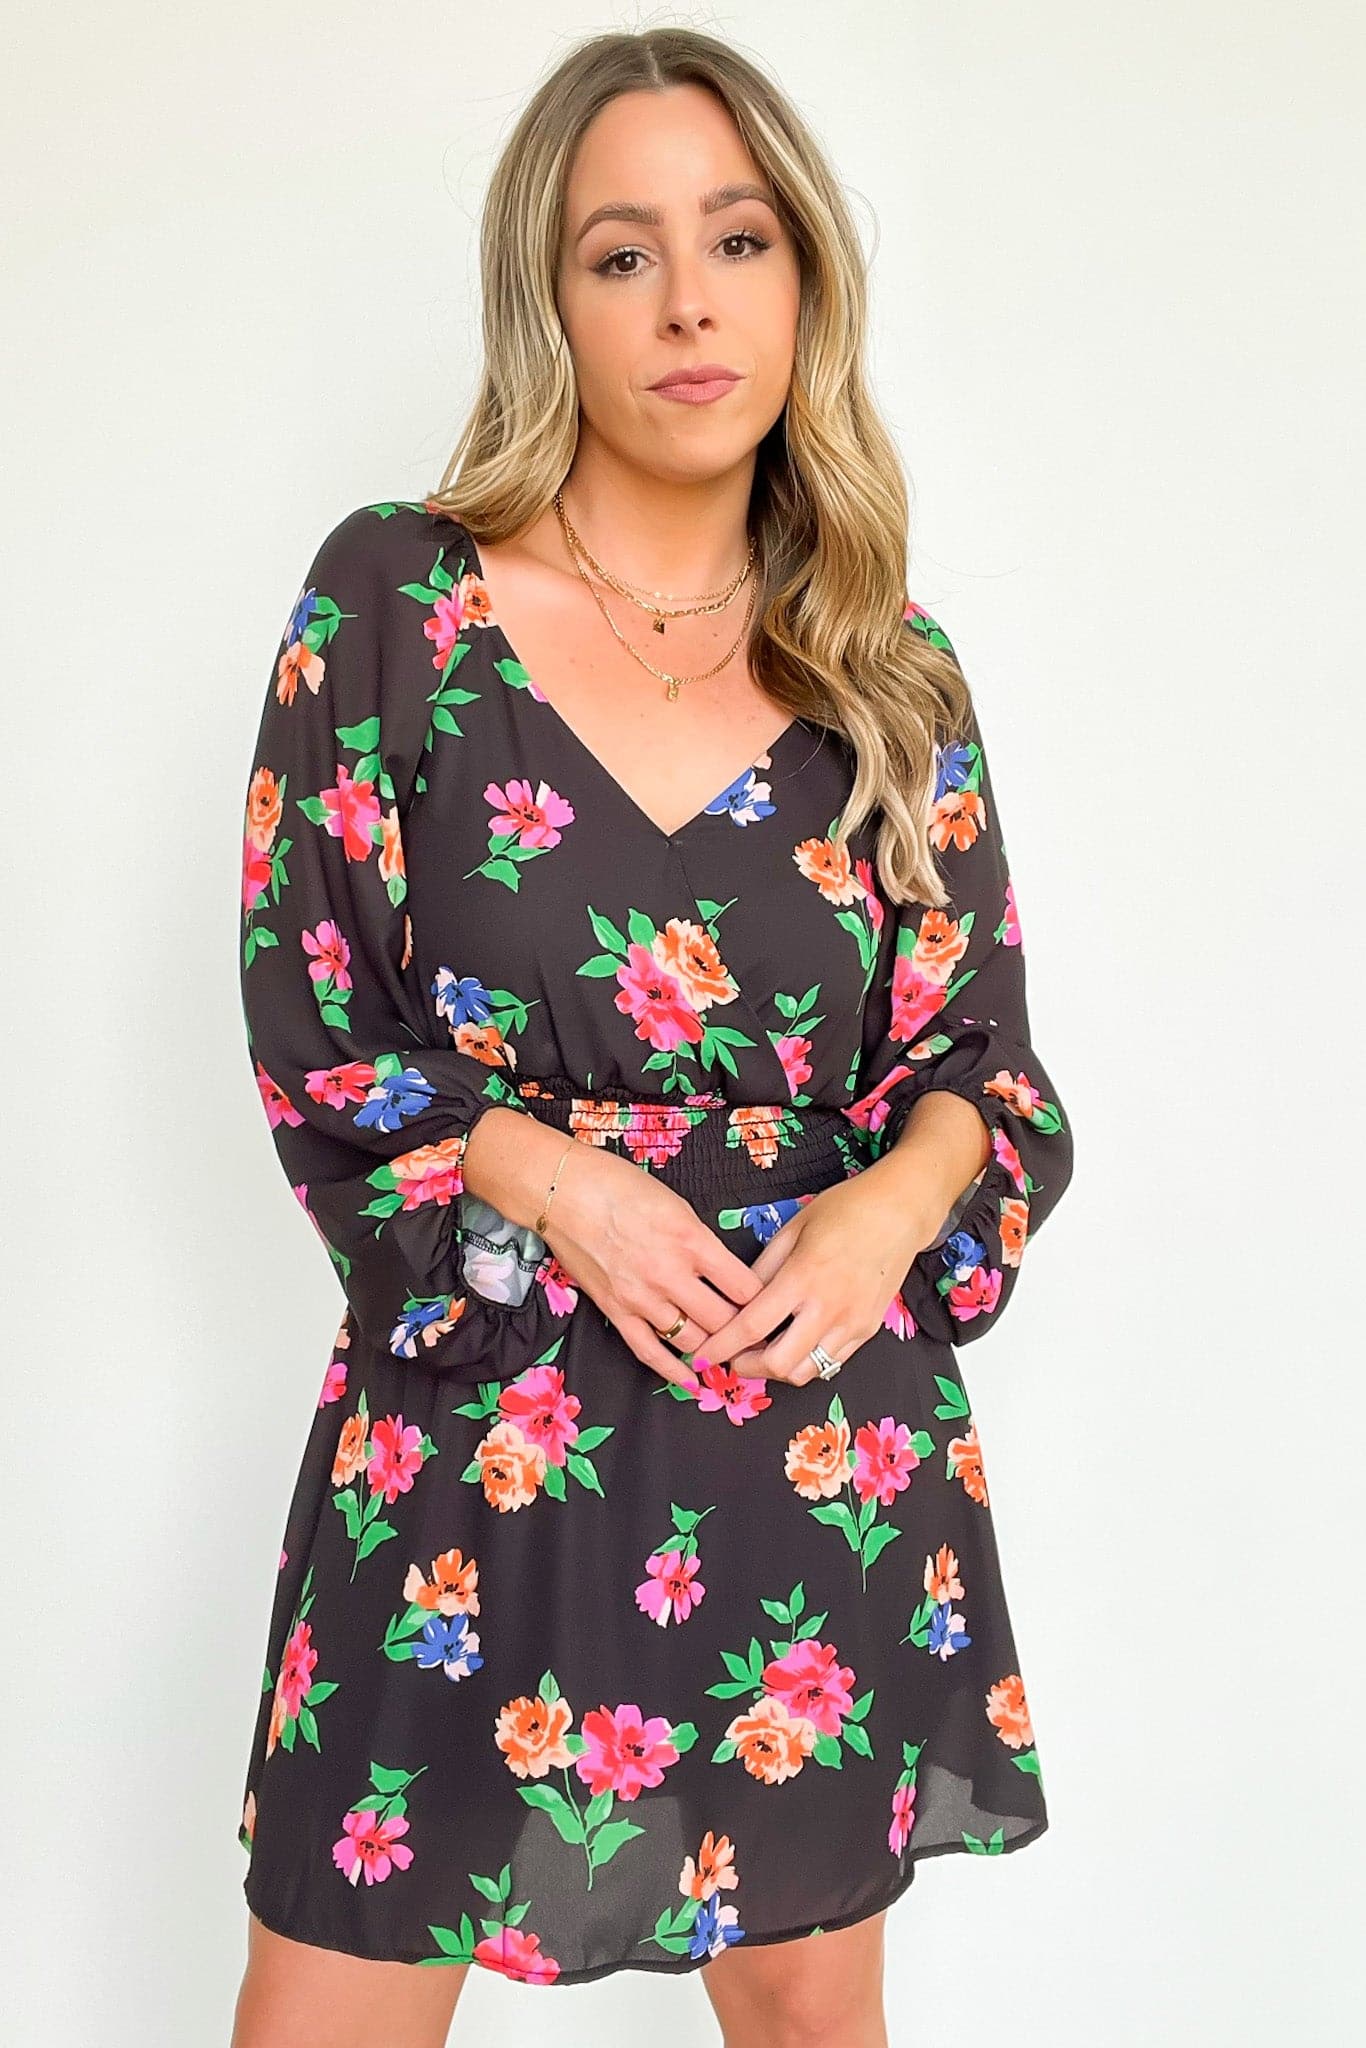  Thoroughly Sweet Floral Print Smocked Waist Dress - FINAL SALE - Madison and Mallory